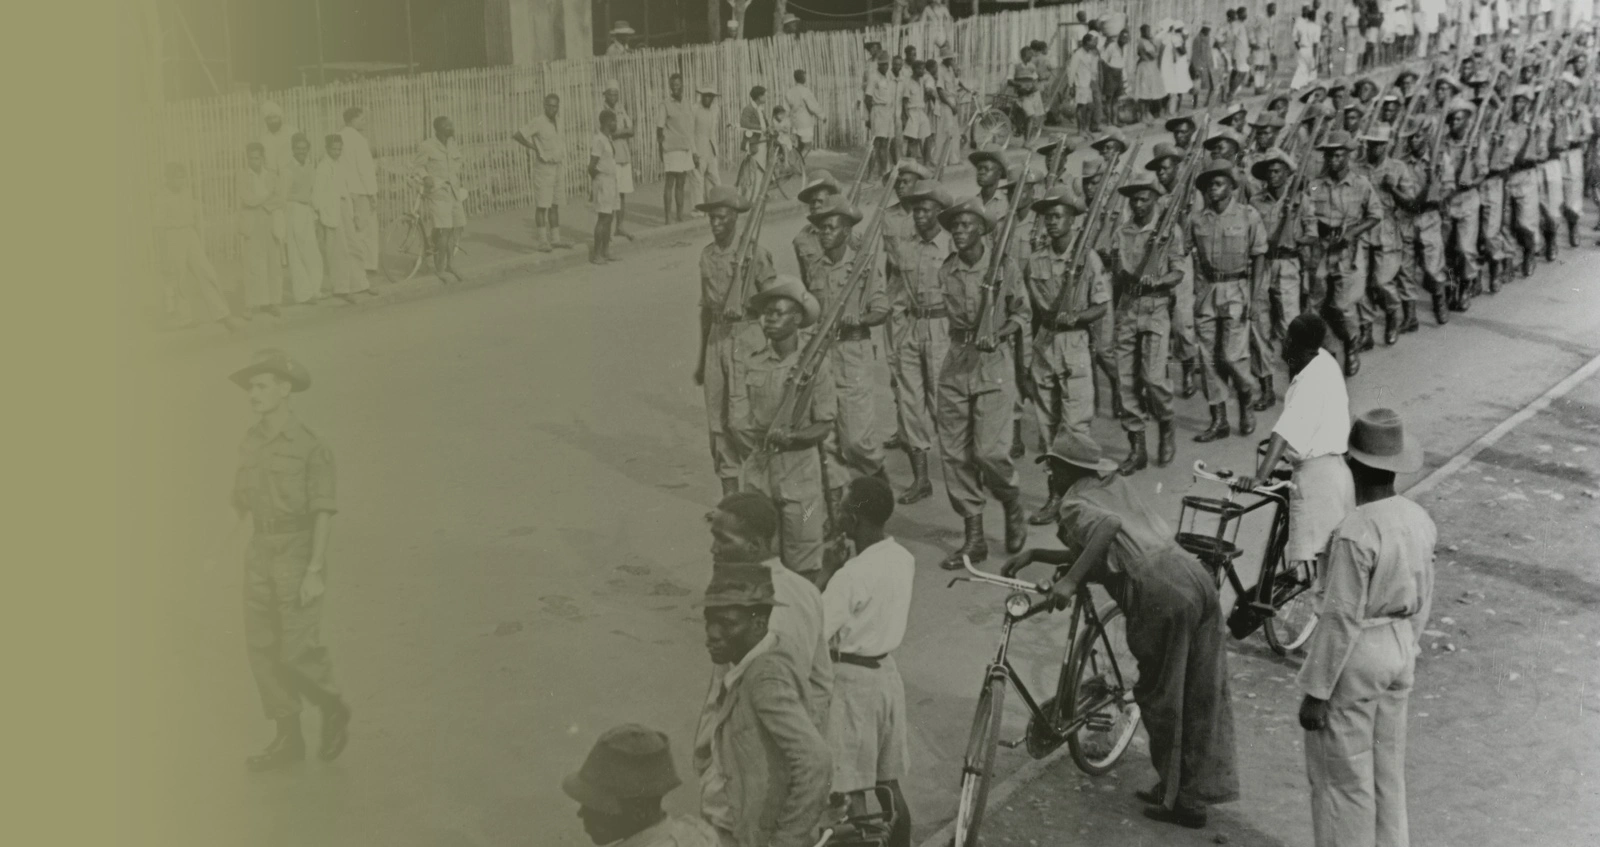 The return of 7th Battalion, The King's African Rifles, to Nairobi from Burma, 1946 